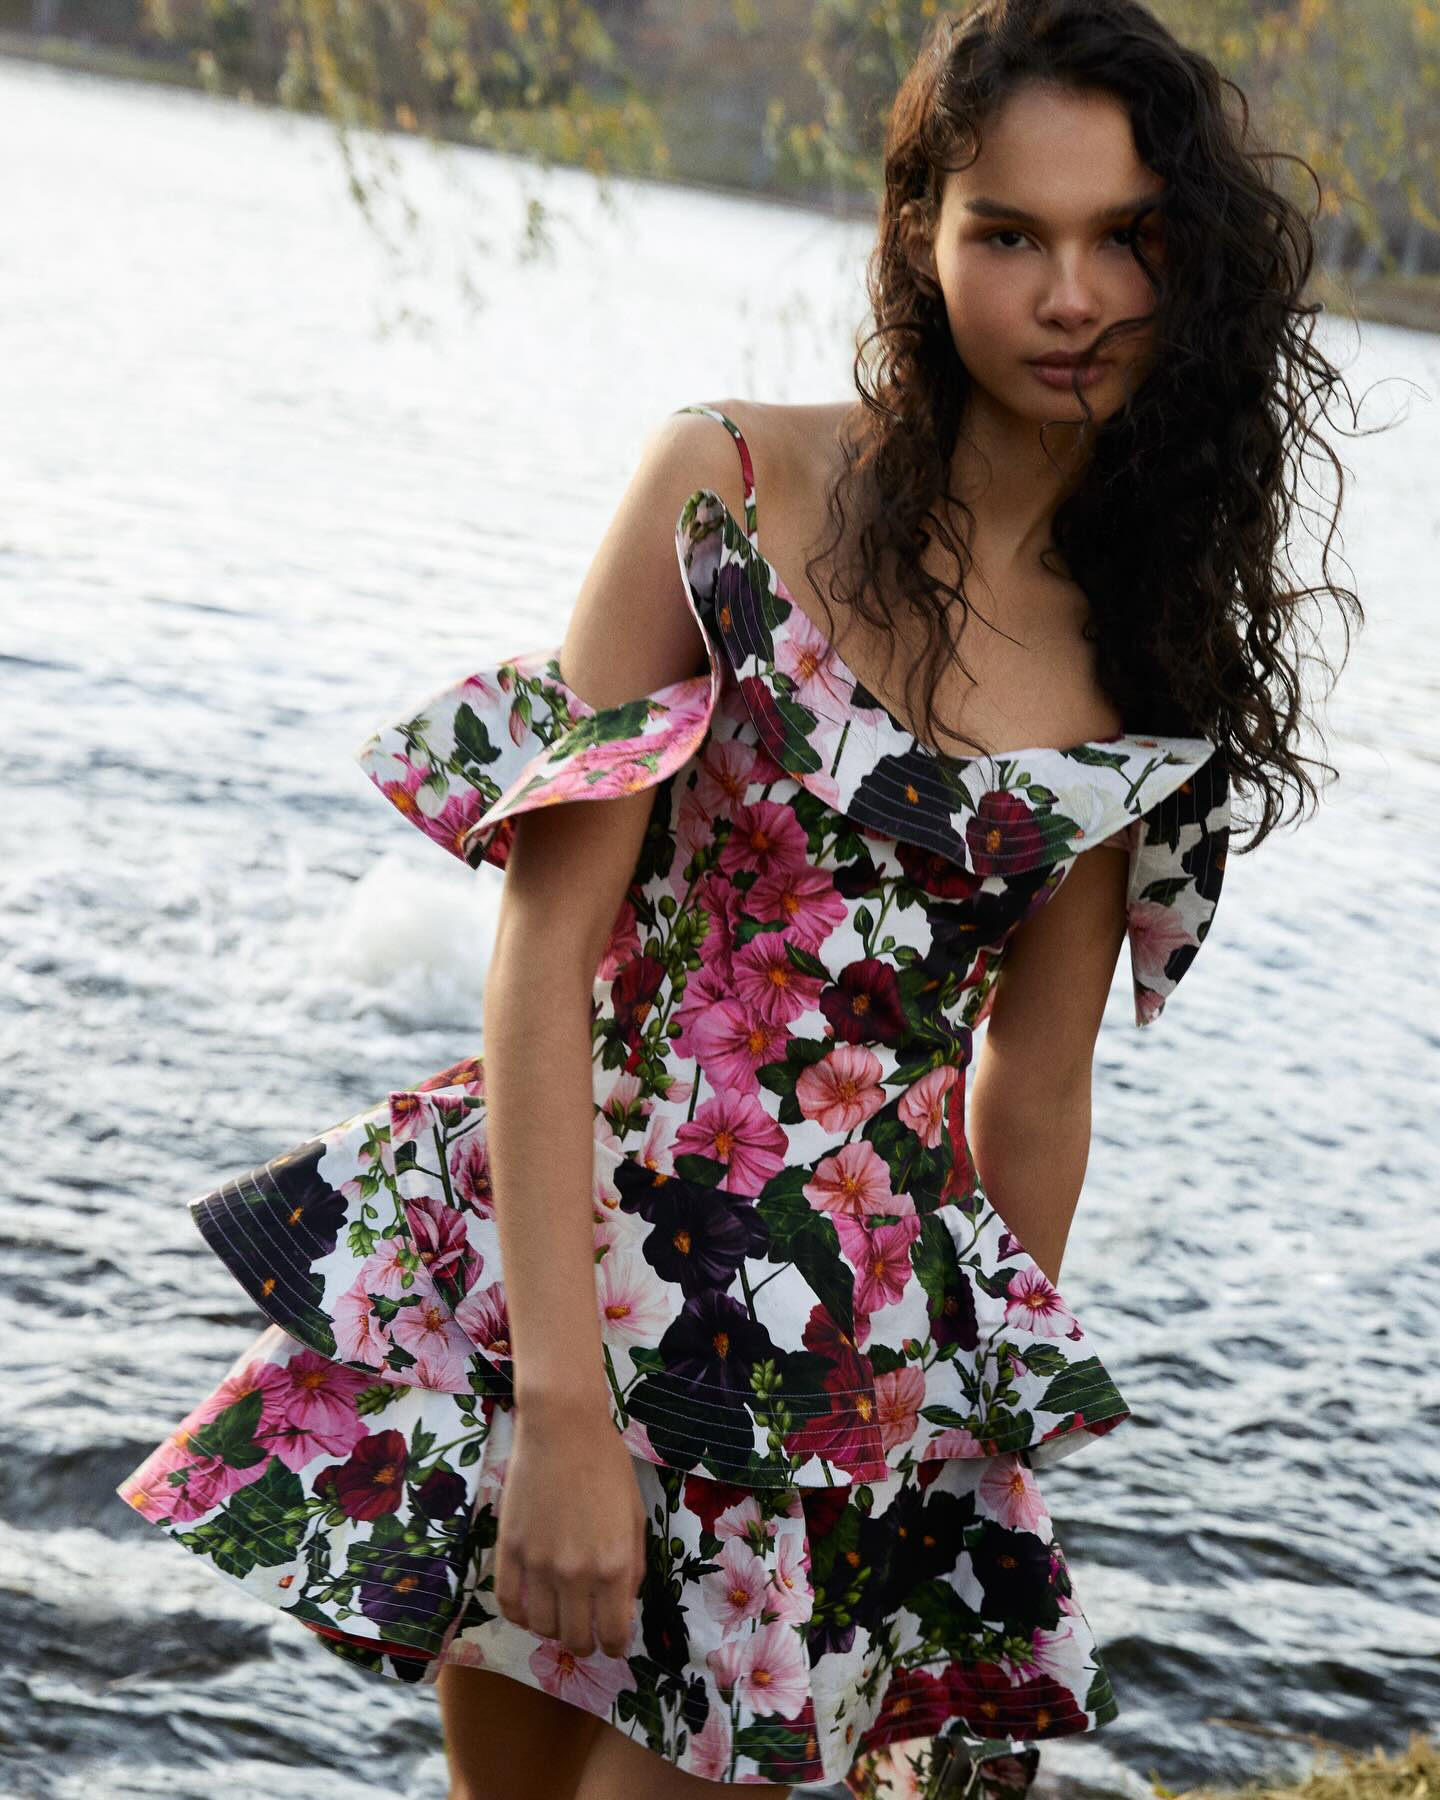 A young woman wearing a Printed Designer Mini Dress stands by a lakeside, her curly hair tousled. The background features tranquil water and sparse foliage.